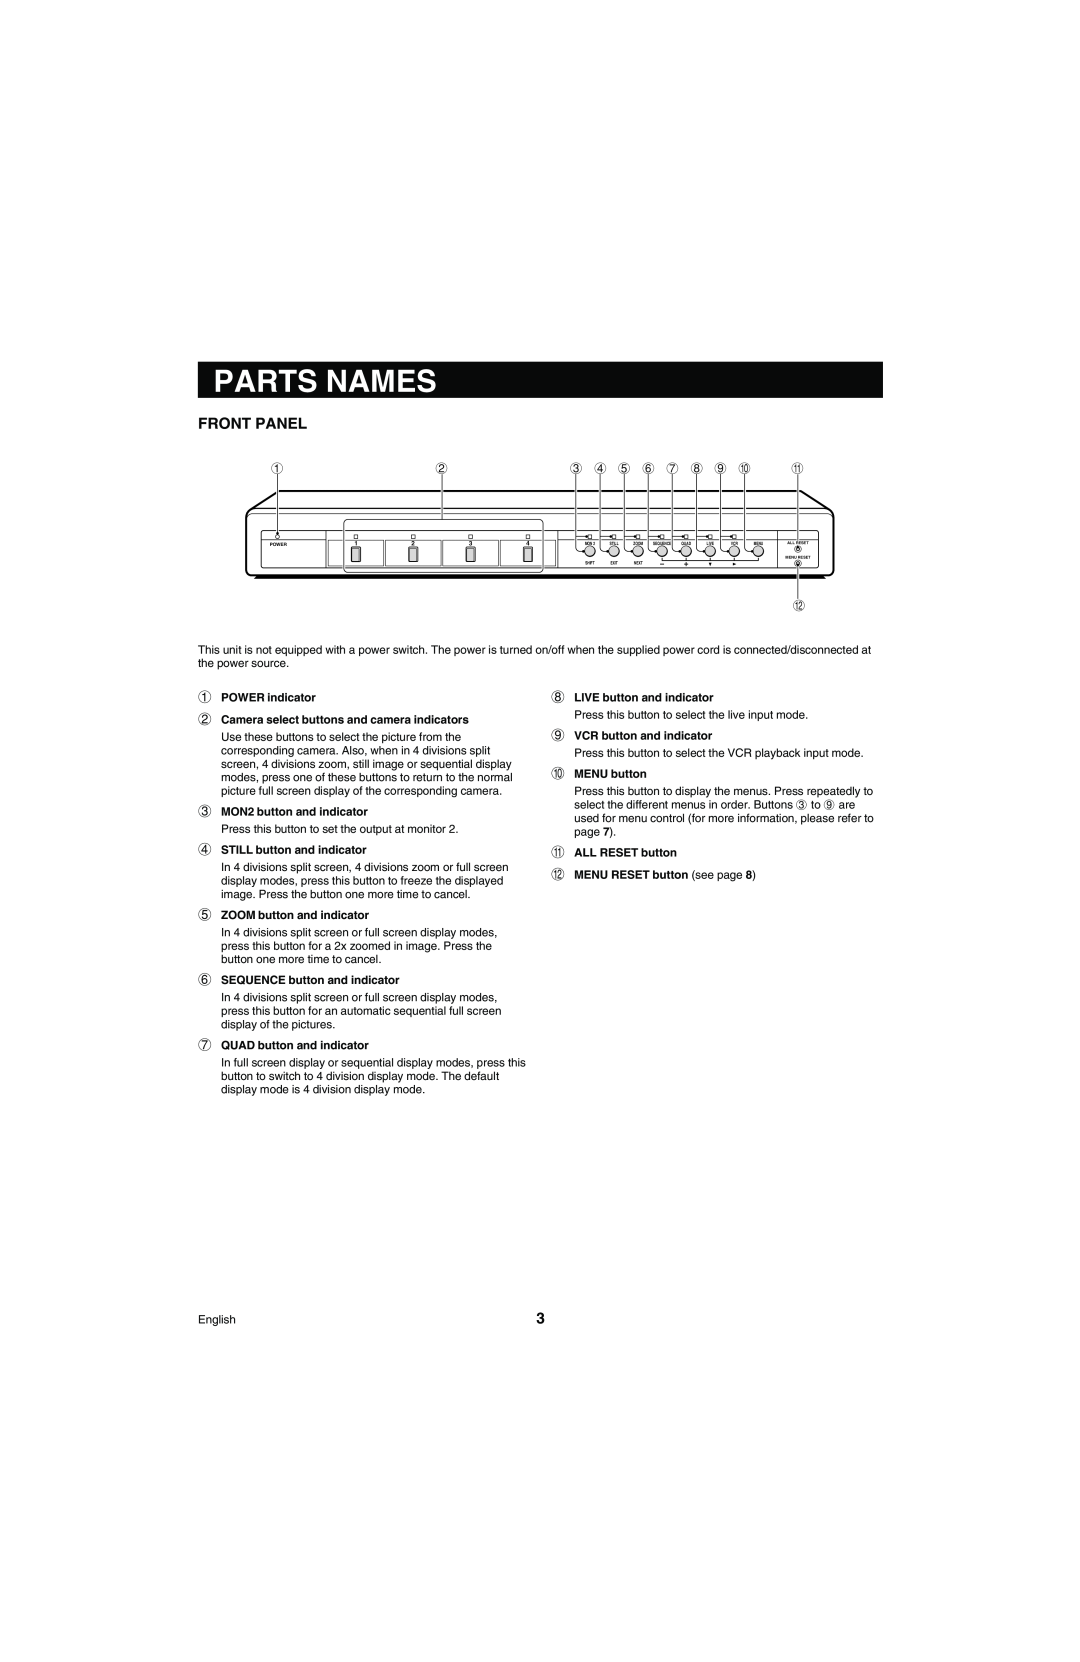 Sanyo MPX-MD4 instruction manual Parts Names, Front Panel, 3 4 5 6 7 8 9 F G 